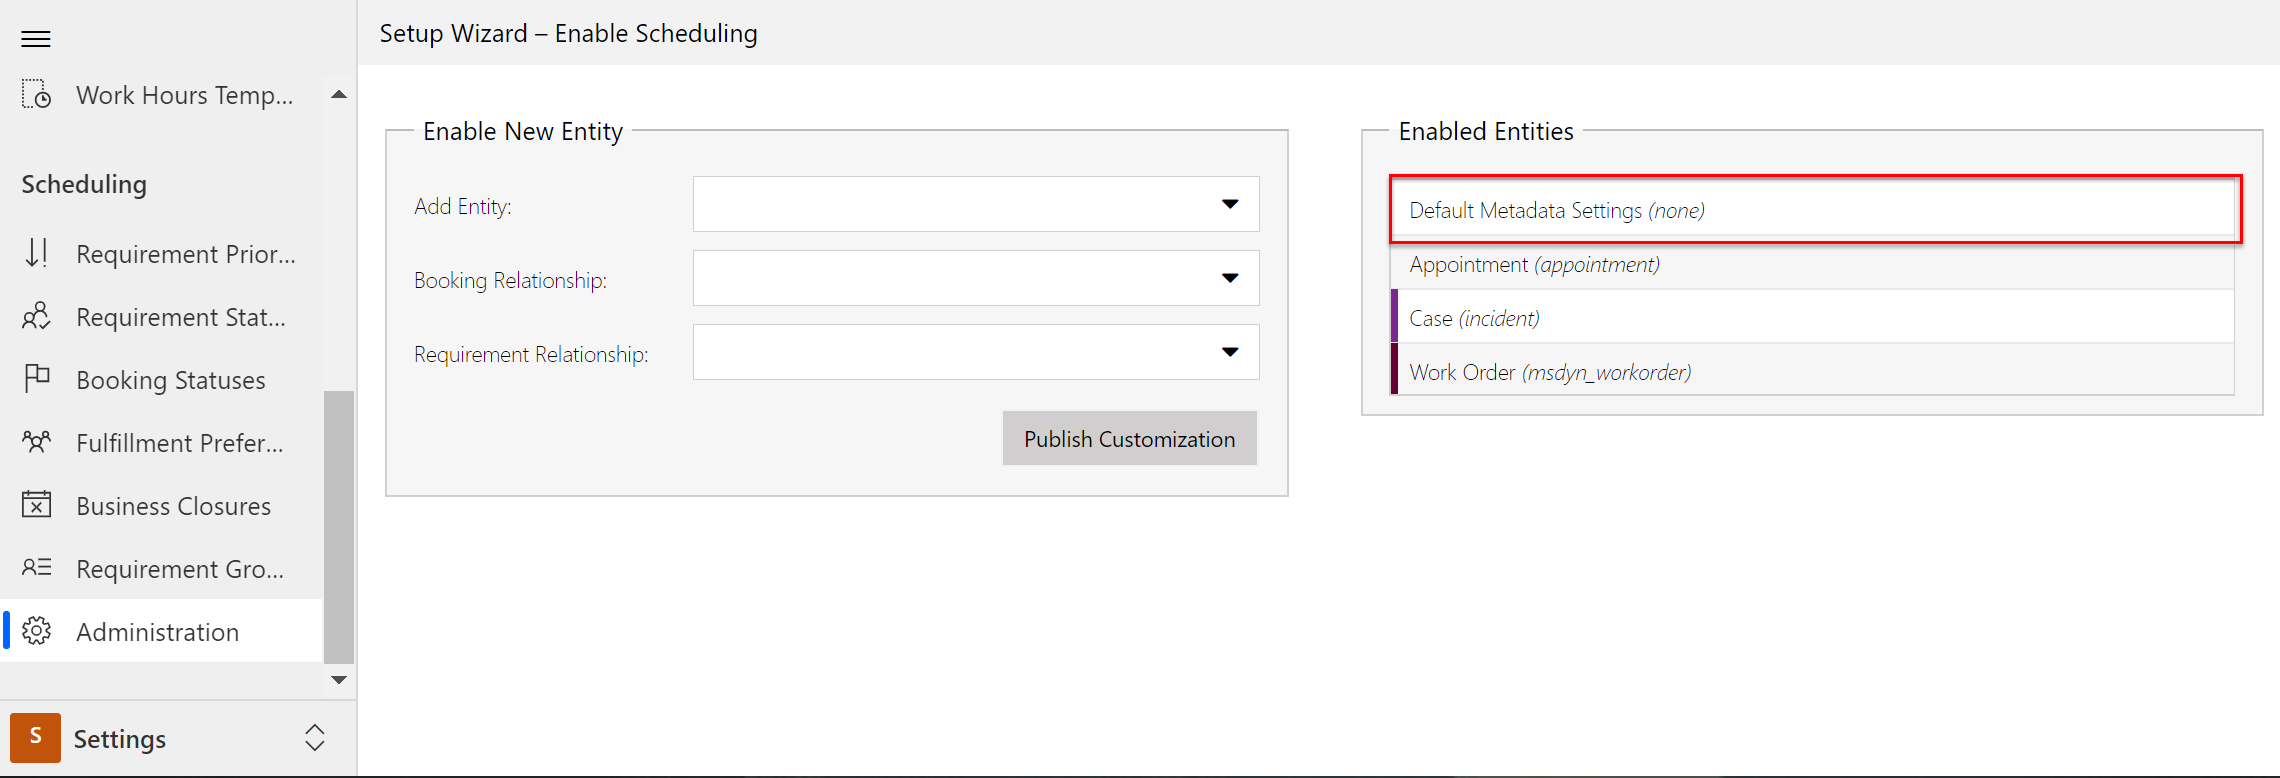 Screenshot of the "Default Metadata Settings (none) option selected in the enabled entities settings.